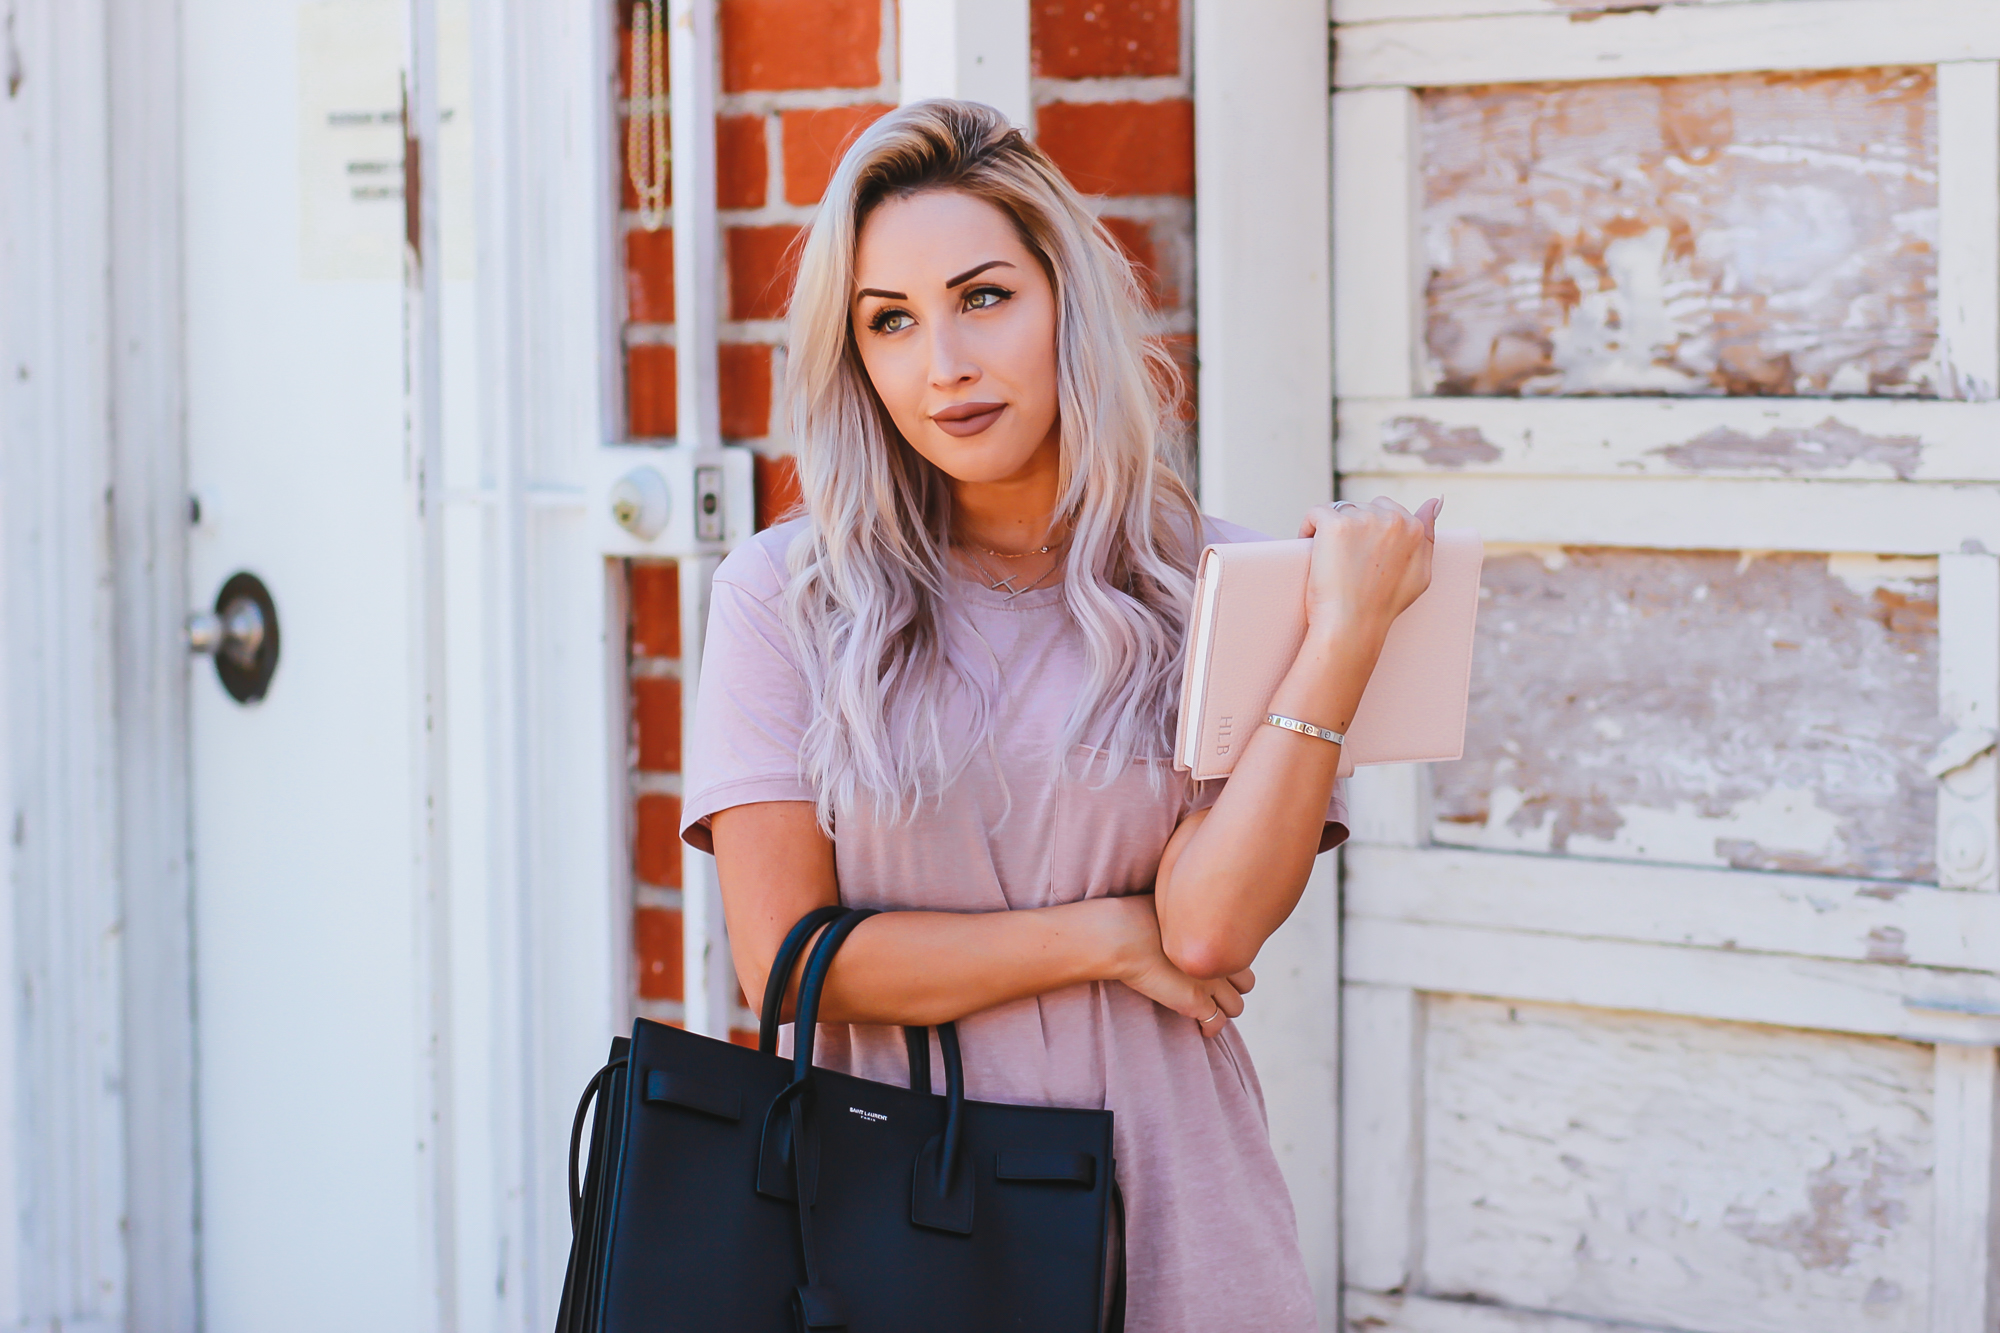 Blondie in the City | Pink Men's Tee from Urban Outfitters as T-Shirt Dress | YSL Bag